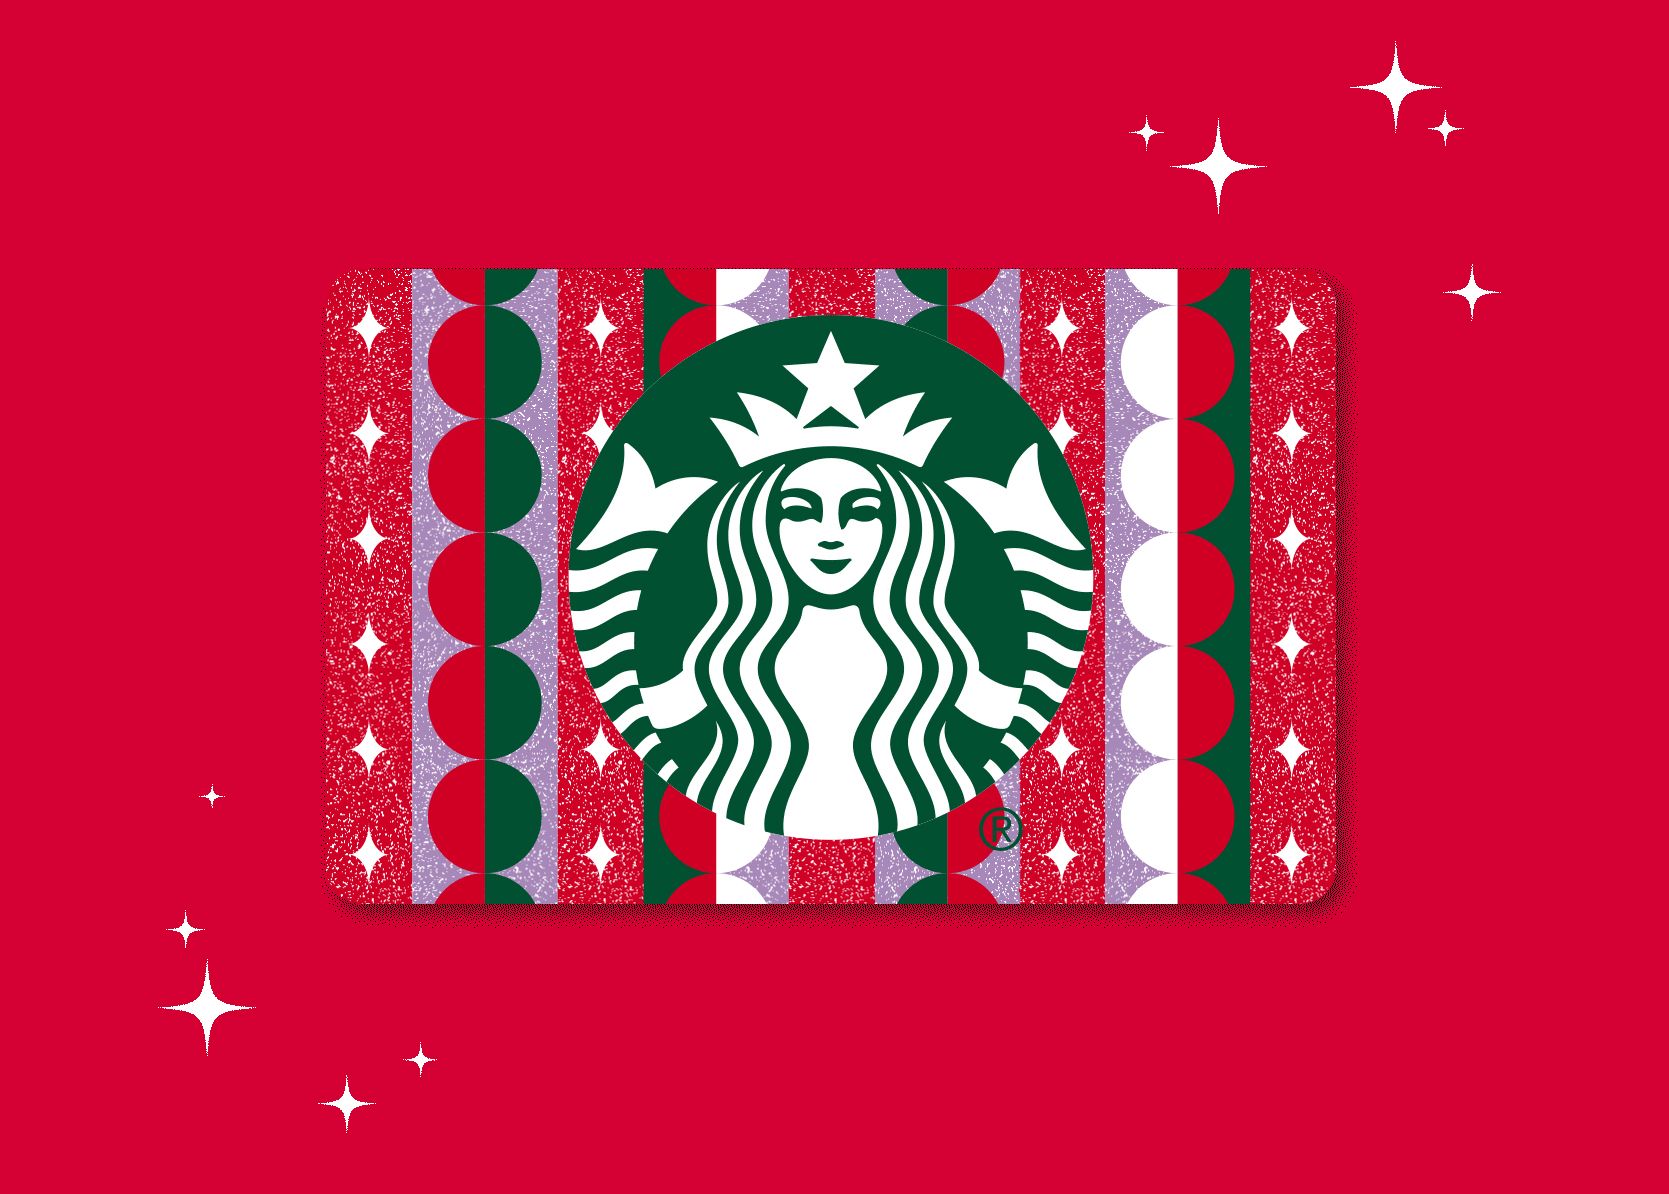 Get a Free $5 eGift Card with $20+ eGift Card Purchase at Starbucks Now Through to Cyber Monday